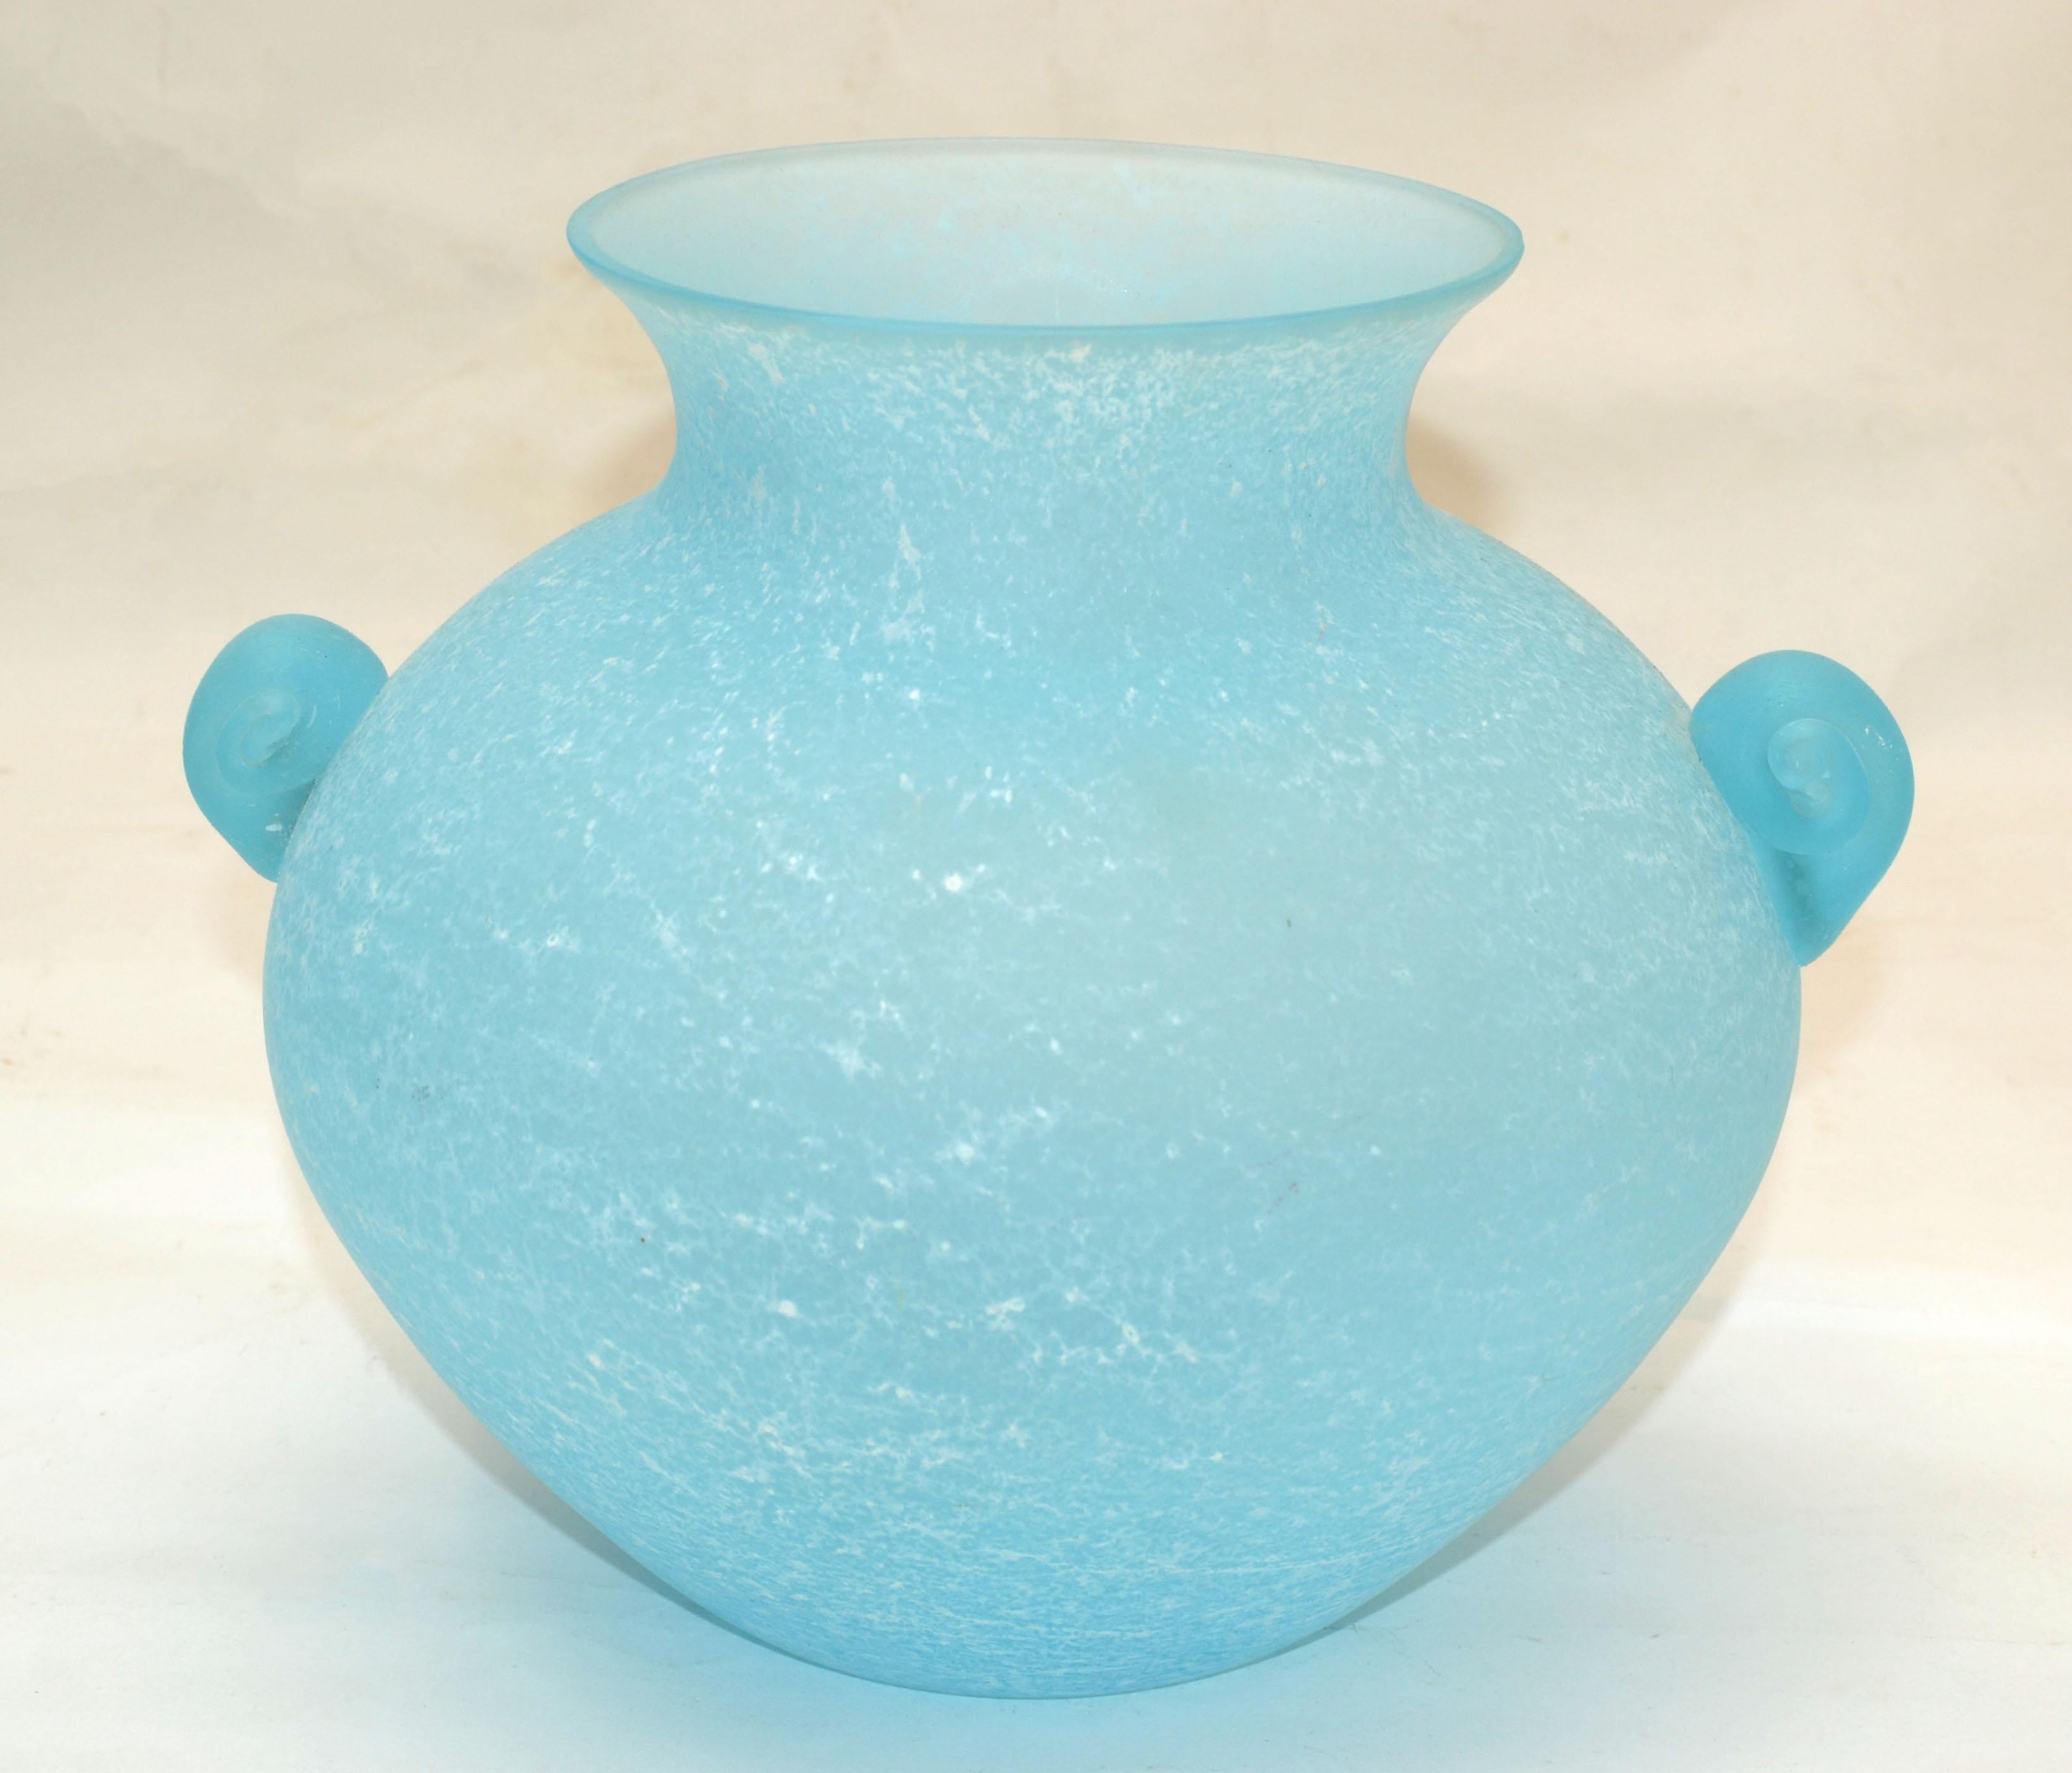 Mid-Century Modern Baby Blue Scavo glass Murano Art glass bud vase, vessel, decanter Mid-Century Modern made in Italy in 1980.
Measures Handle to Handle: 9 inches.